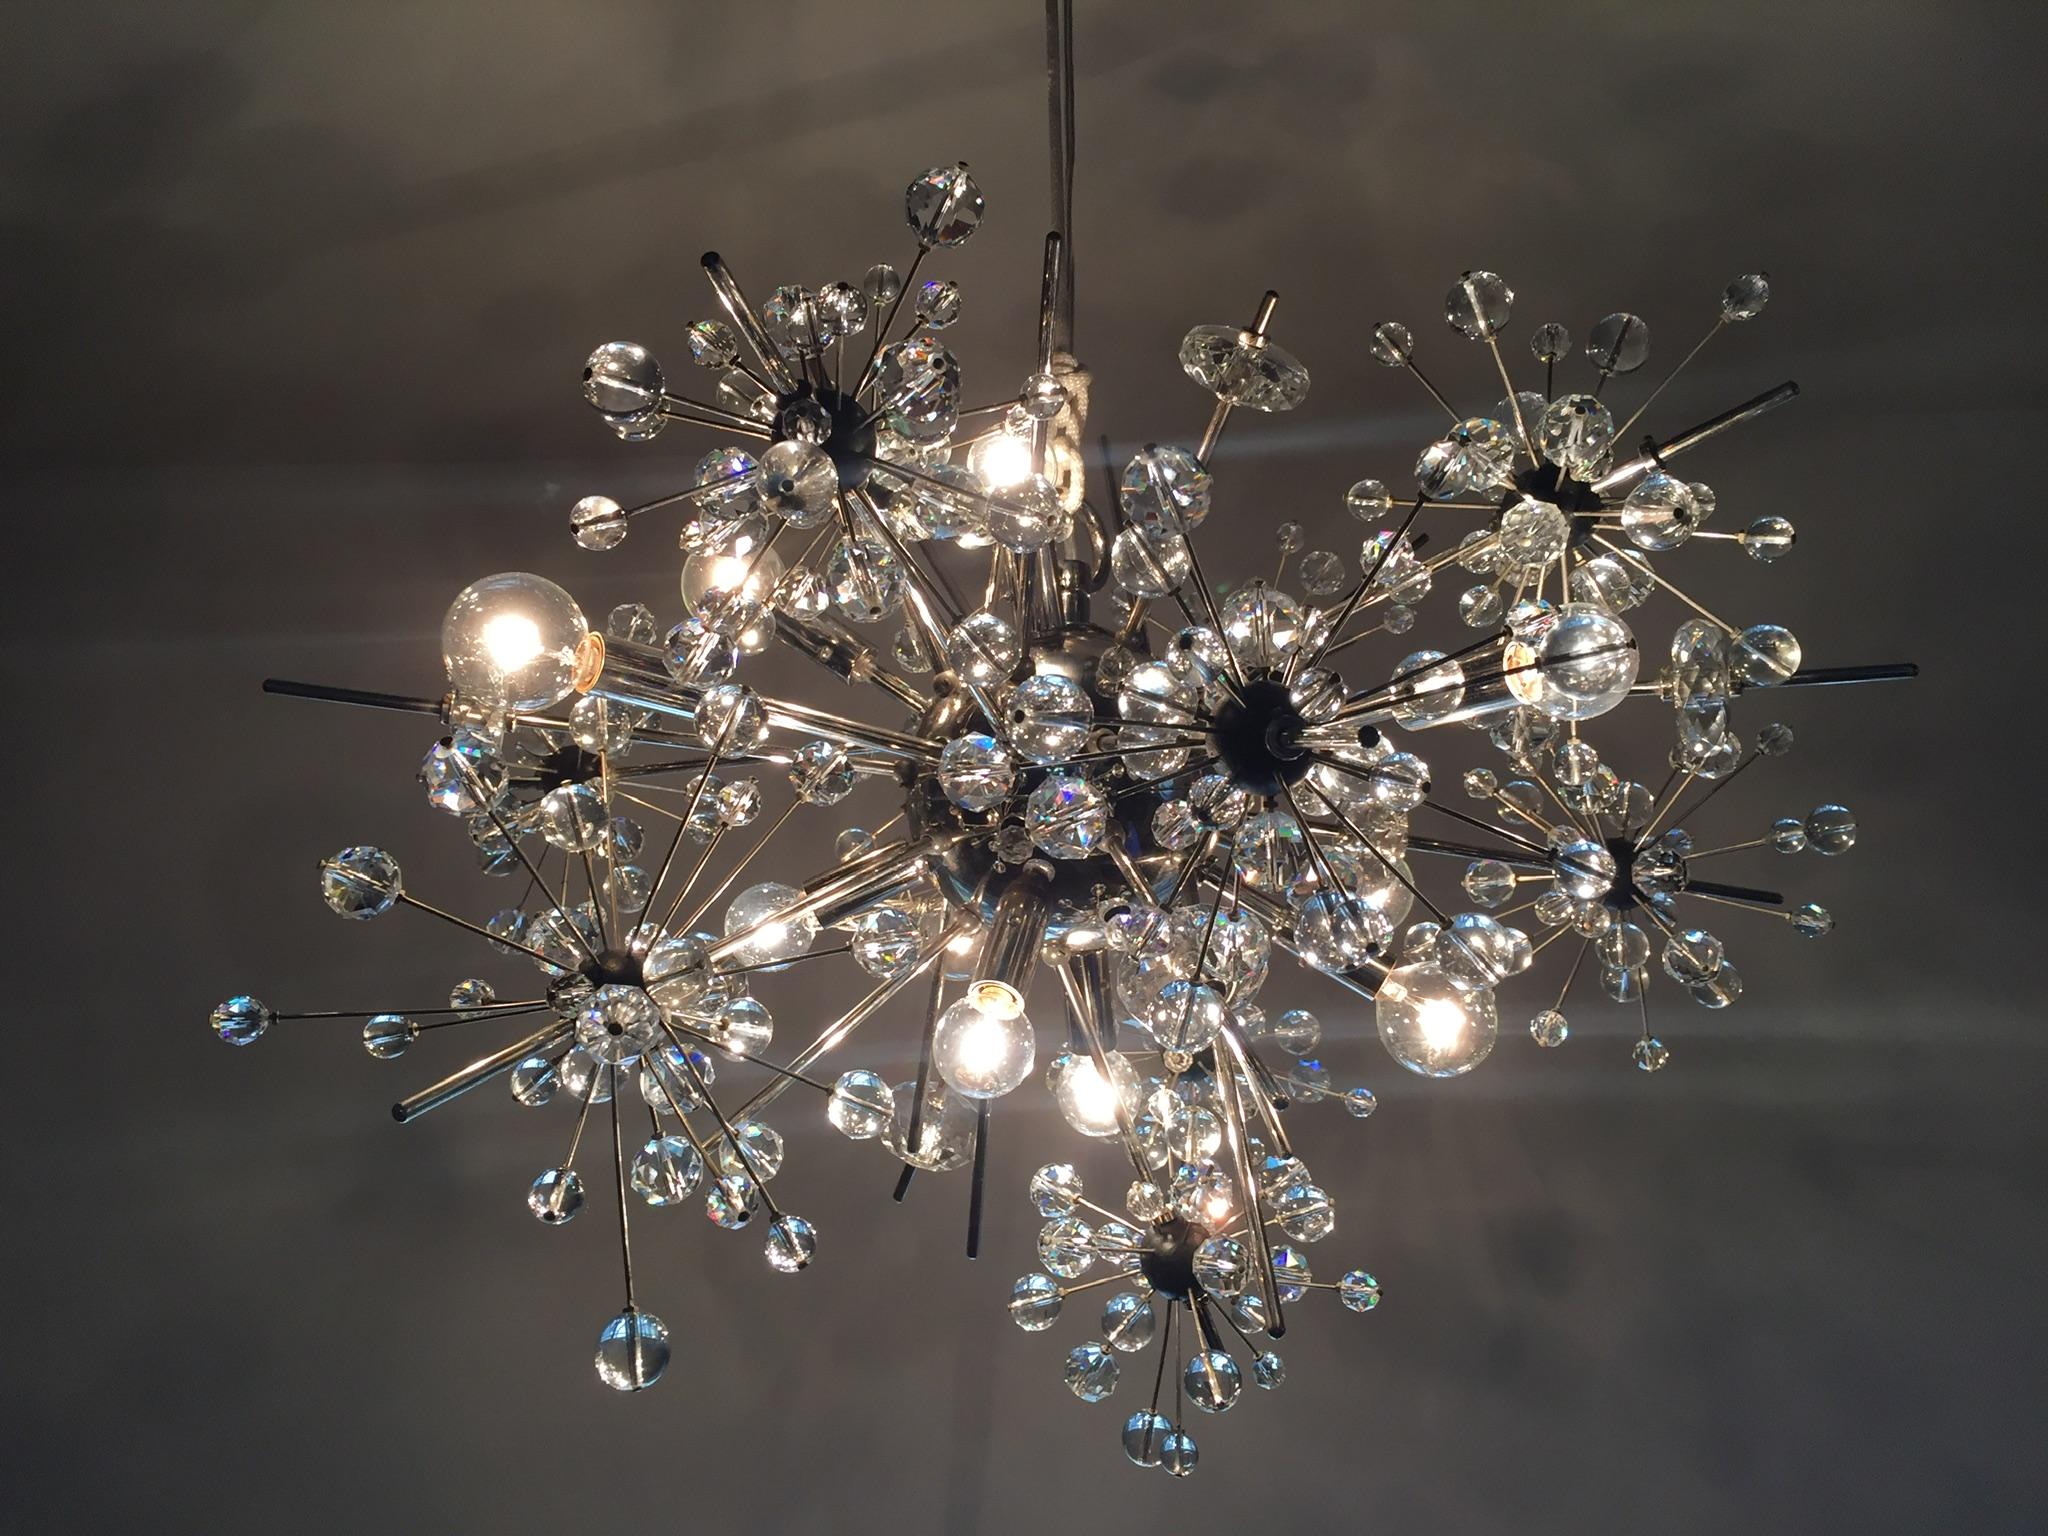 Lobmeyr, designed by Hans Harold Rath originally for the Metropolitan Opera at Lincoln center, made in Austria. Vintage Chandelier, the Met erupted when the chandelier rose toward the ceiling at its grand opening party Sept 16, 1966.